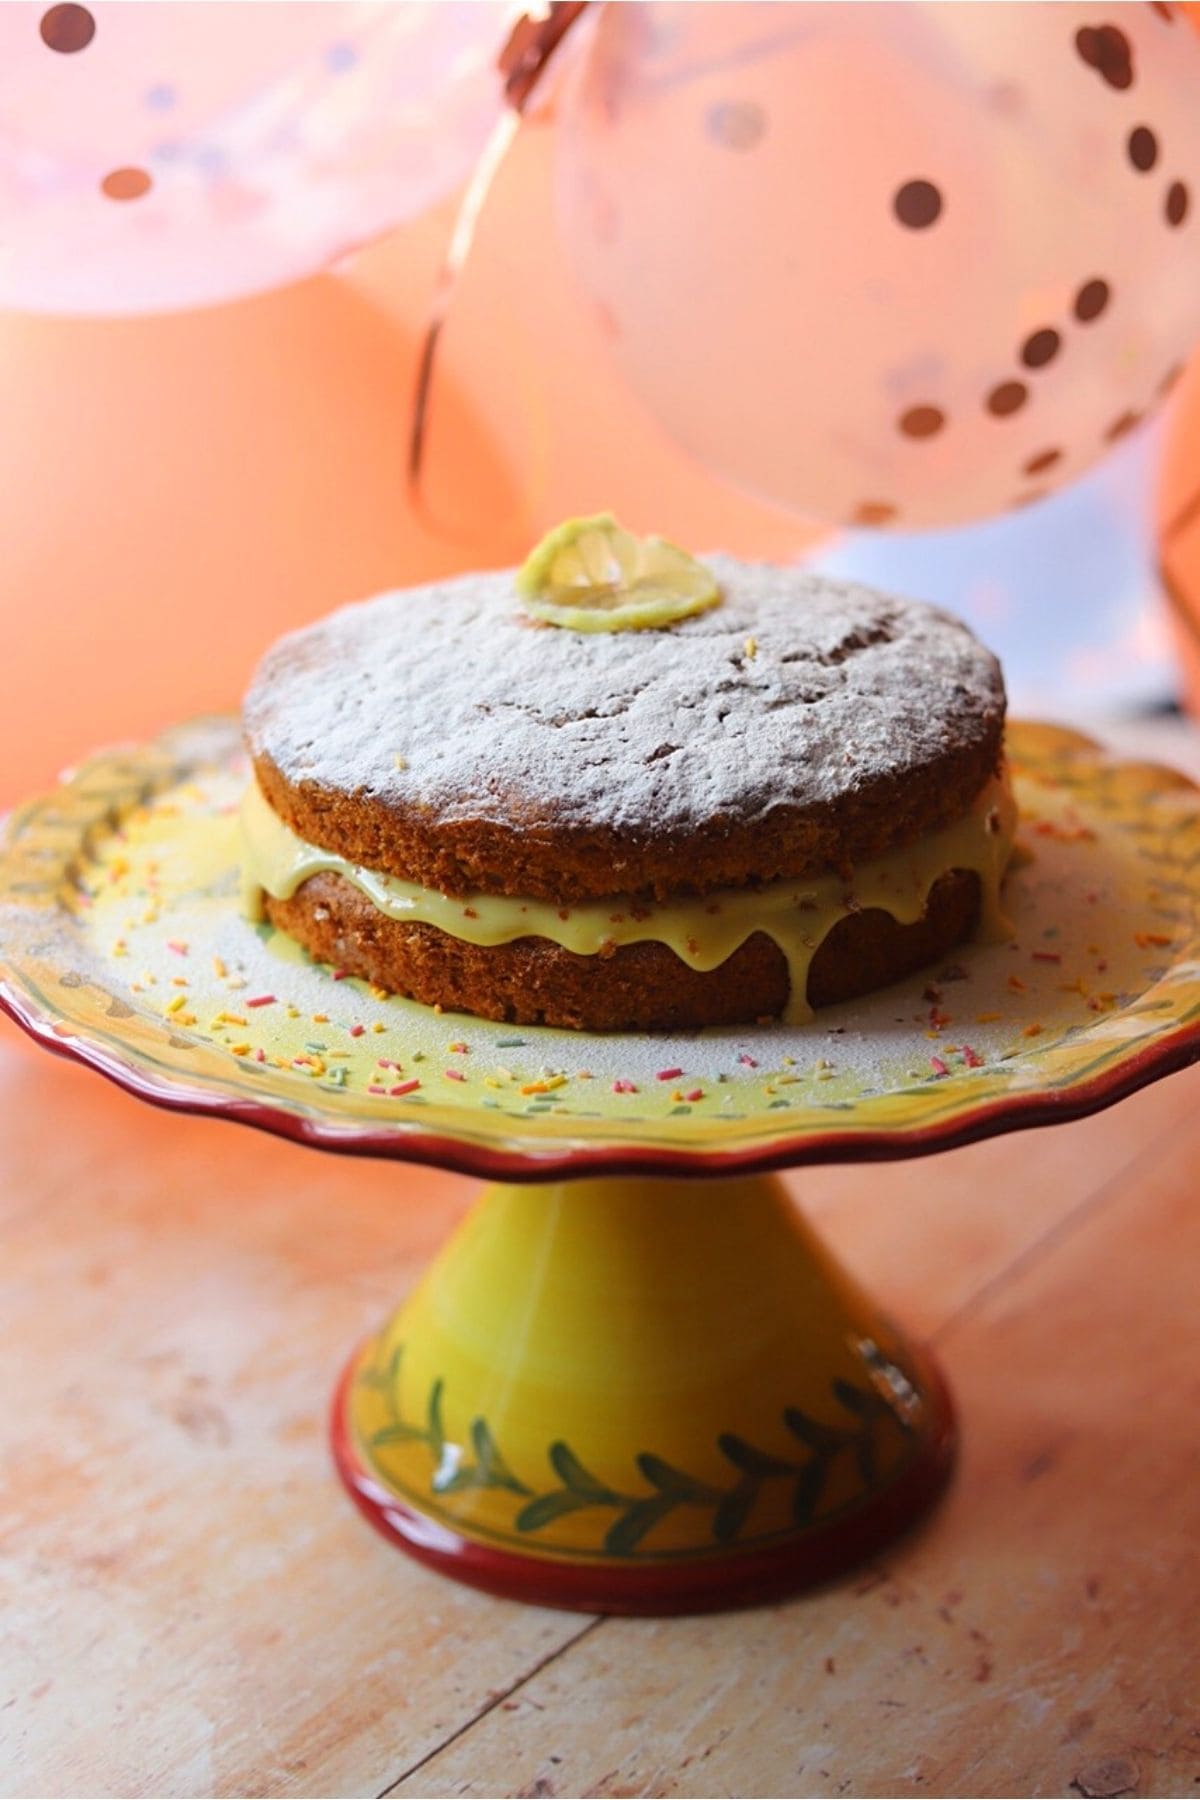 Banana cake on a cake stand, decorated with a slice of lemon and sprinkles.